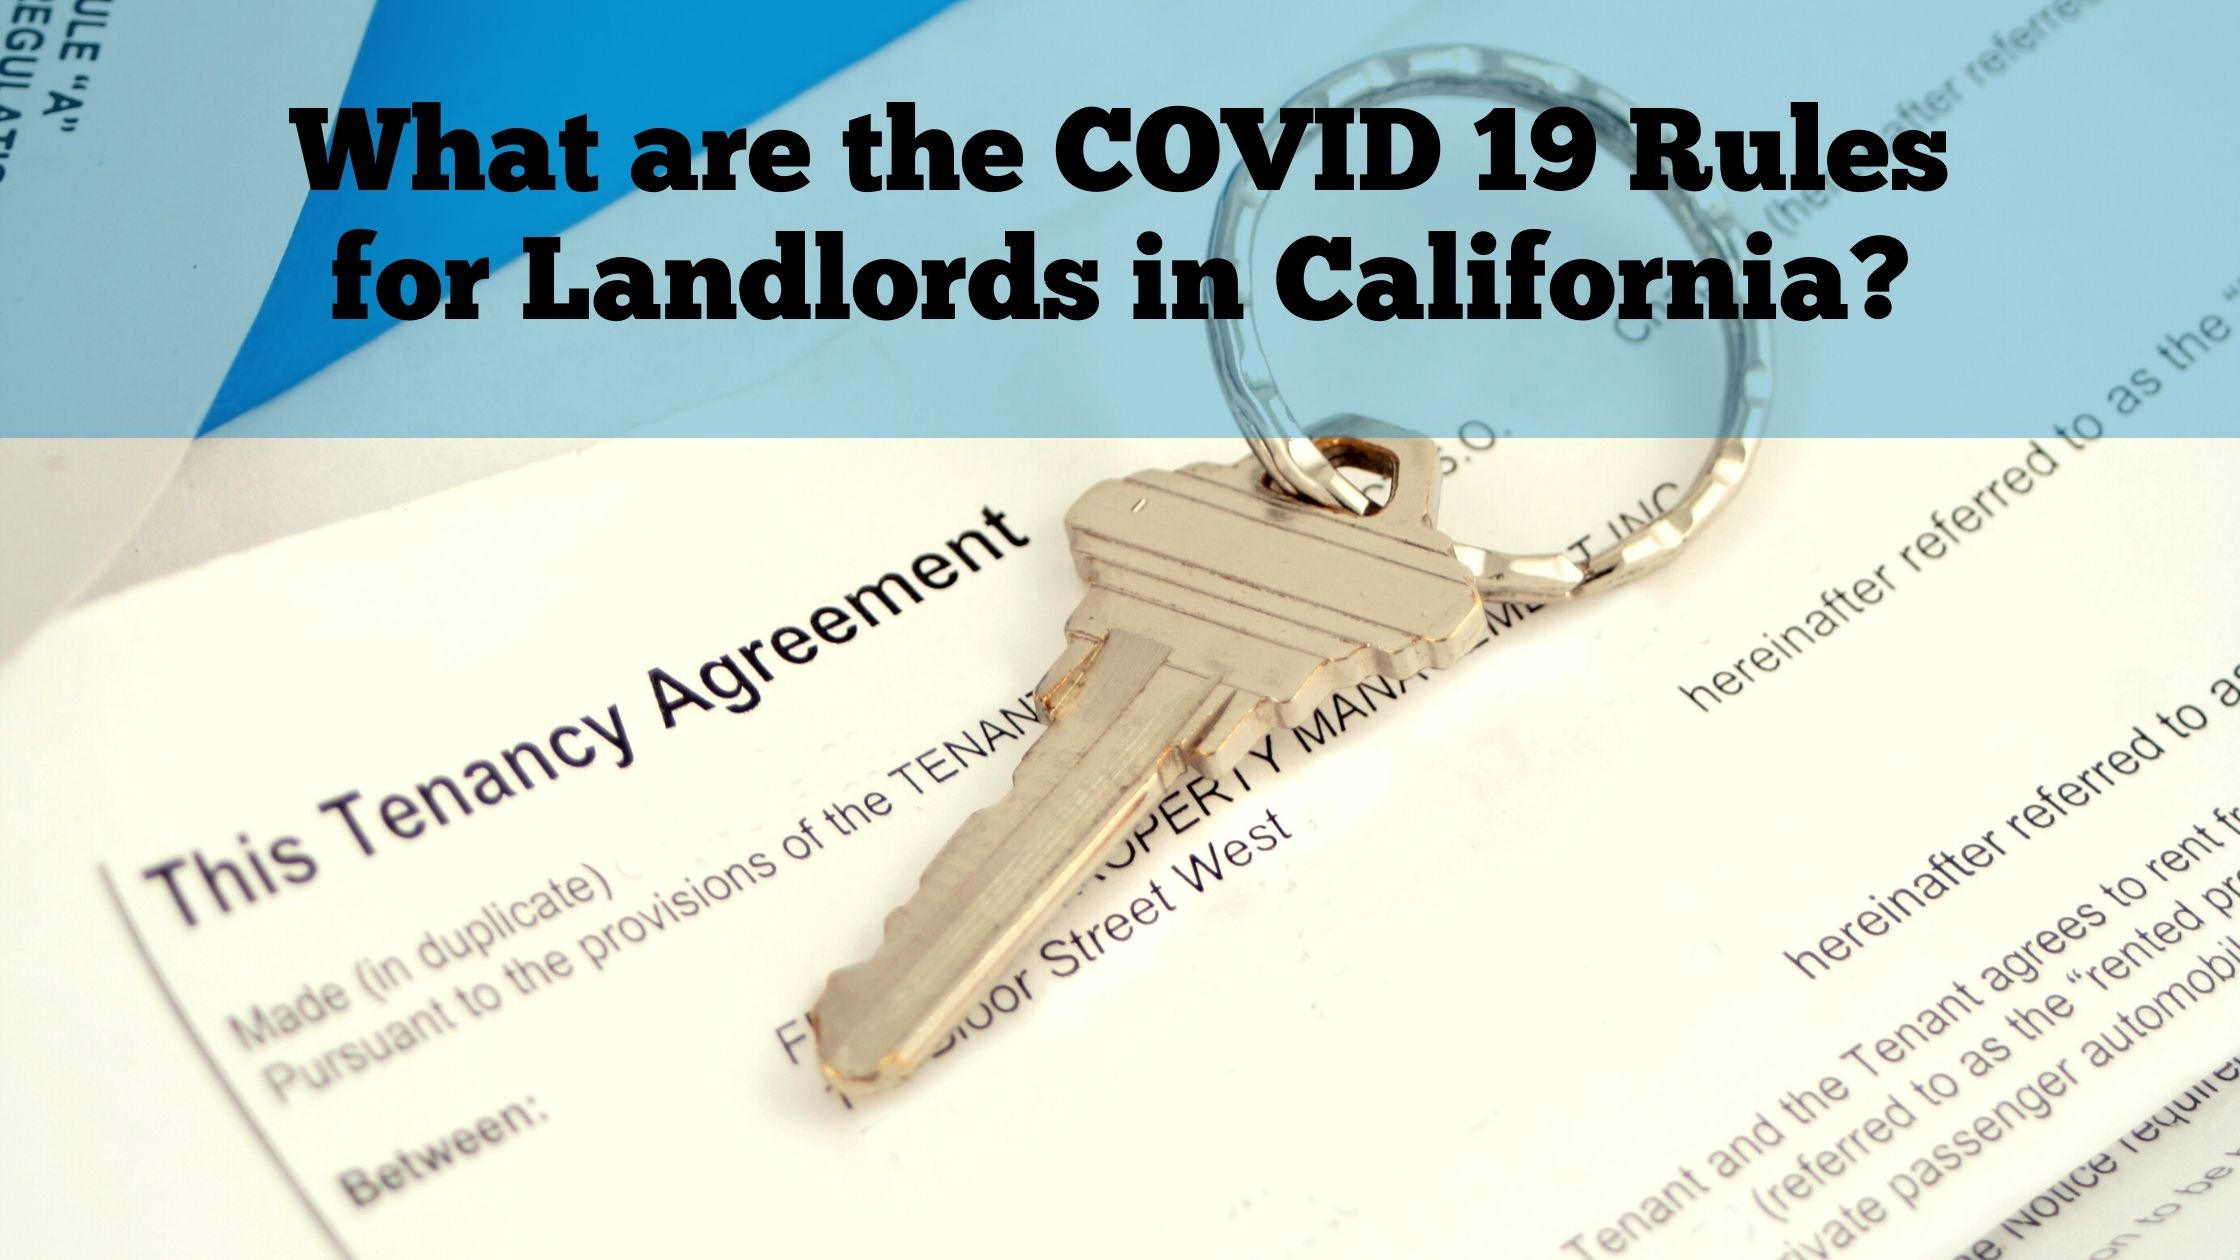 What are the COVID 19 Rules for Landlords in California?